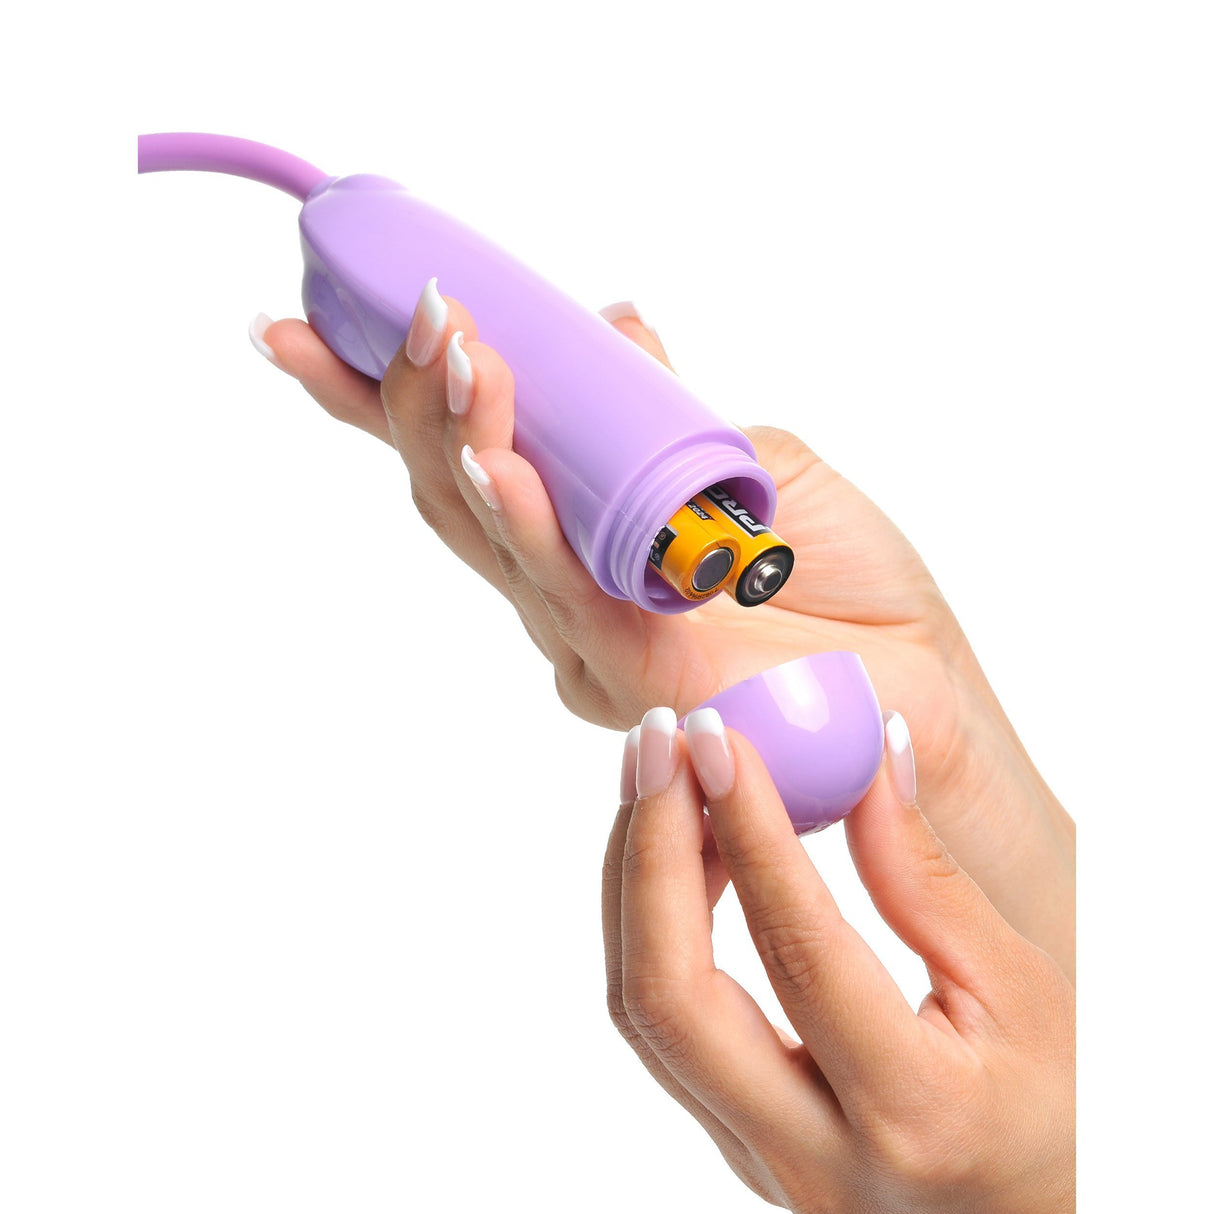 Pipedream - Fantasy For Her Butterfly Flutt-Her Clit Massager (Purple) PD1701 CherryAffairs